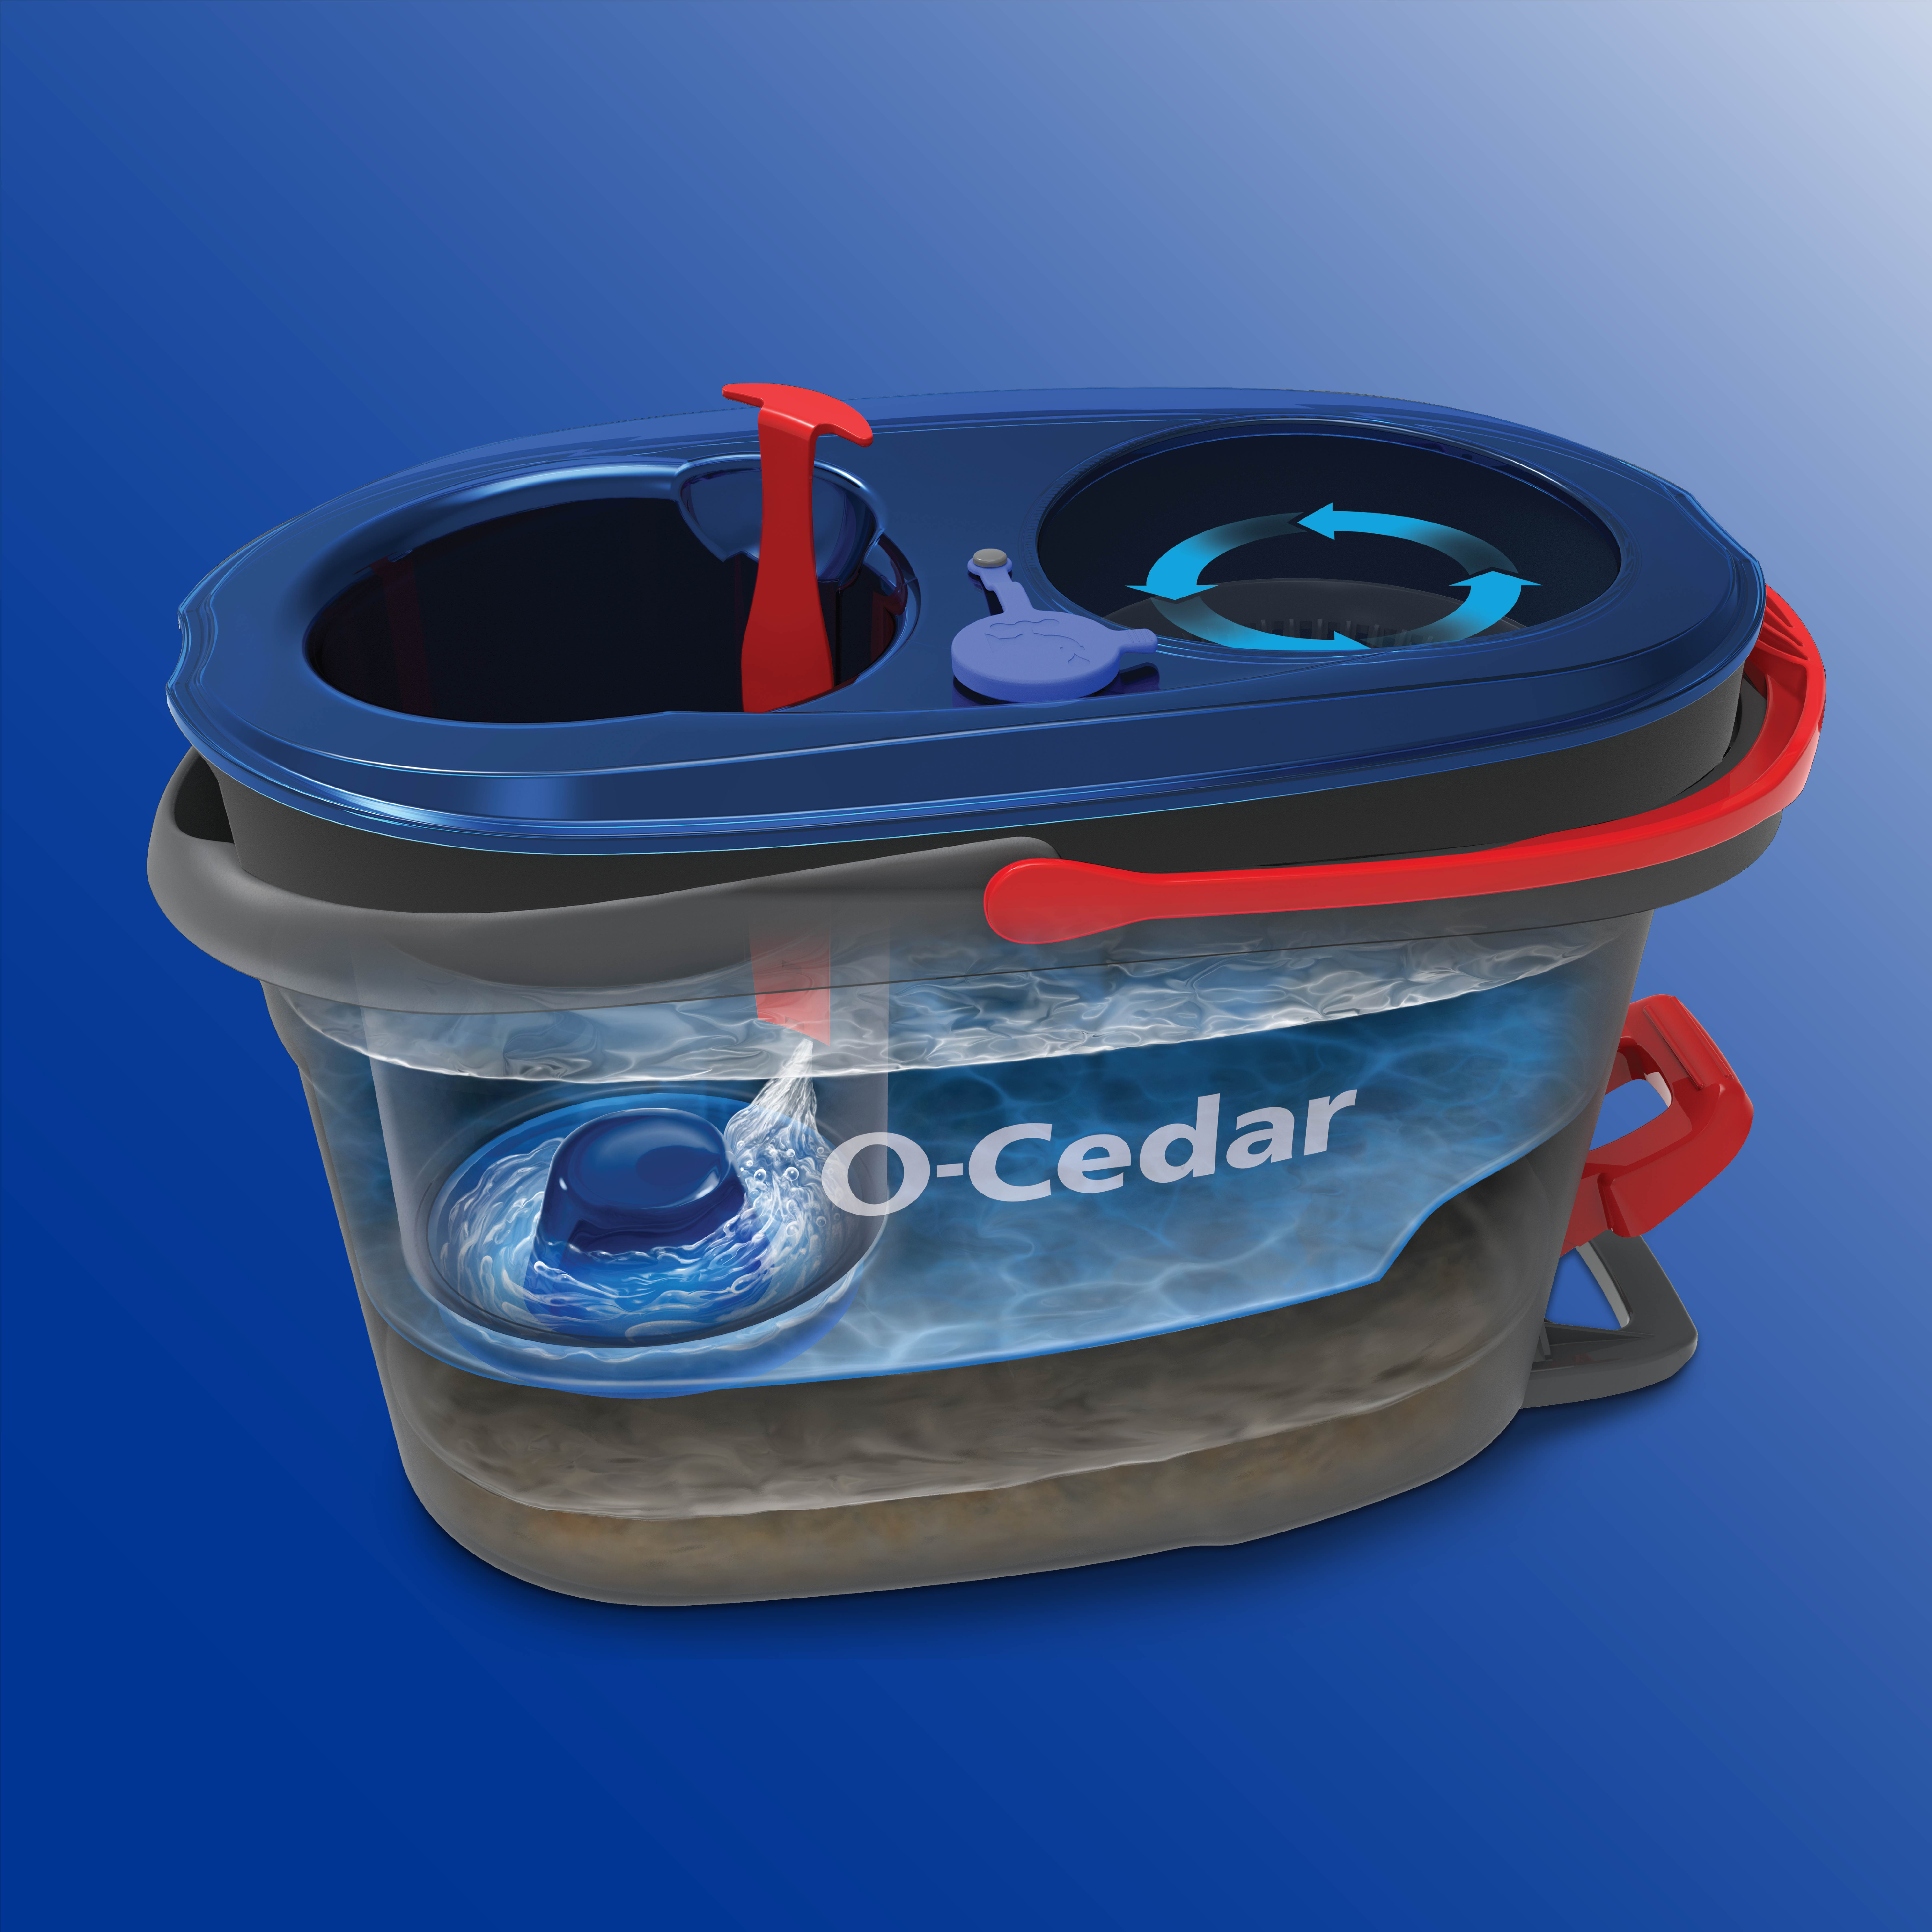 O-Cedar EasyWring RinseClean Spin Mop and Bucket System, Hands-Free System - image 5 of 25